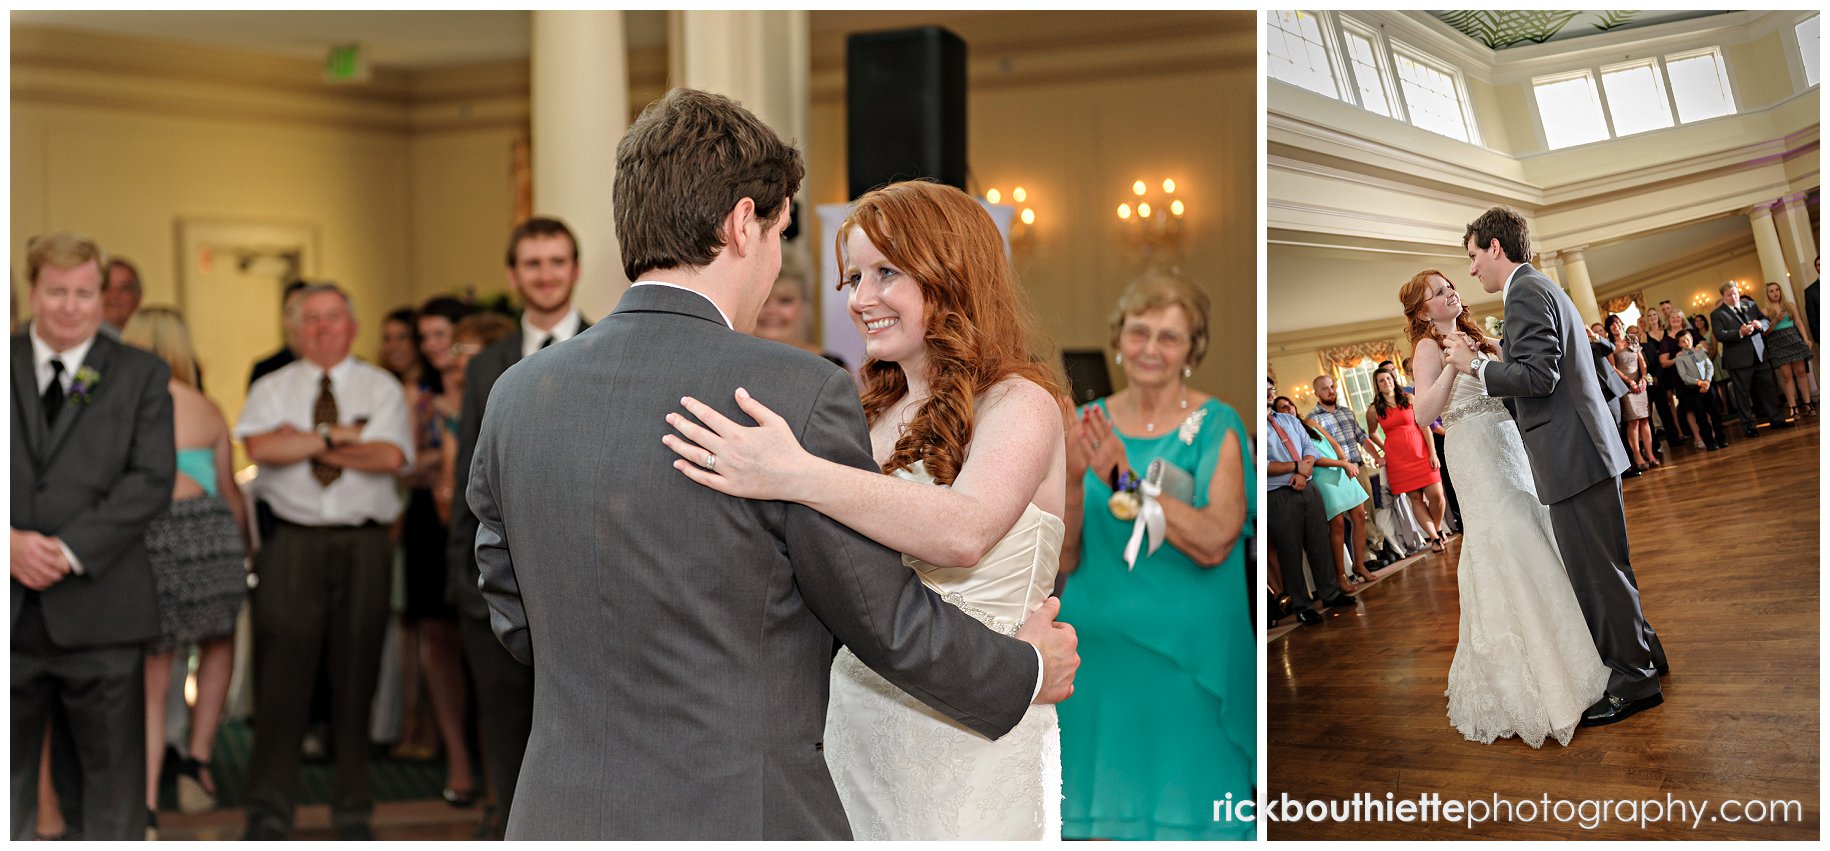 bride and groom first dance at Mountain View Grand wedding